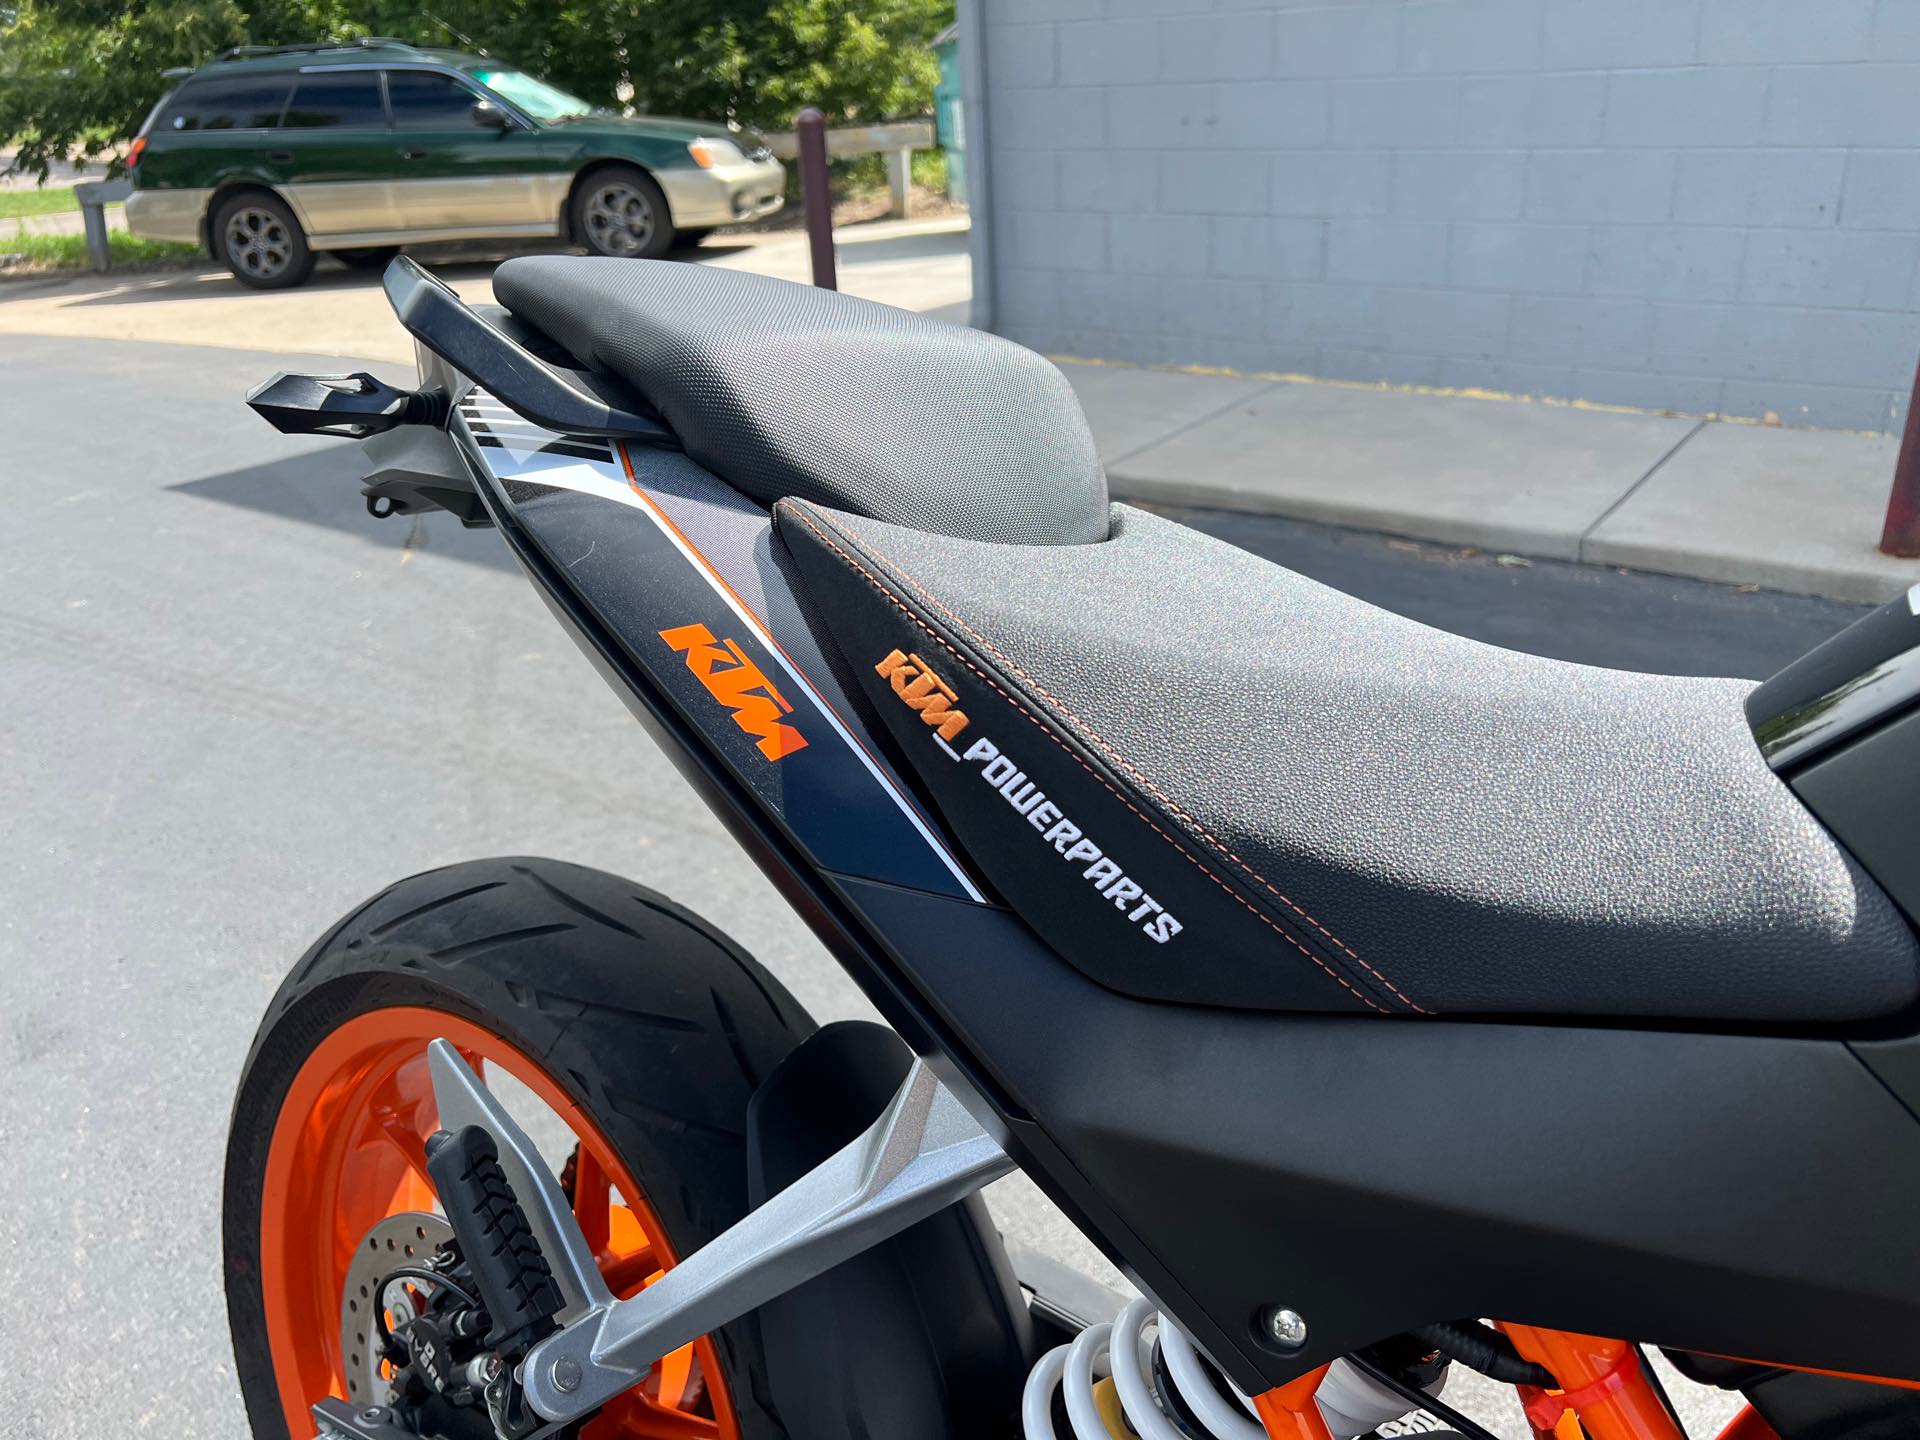 2016 KTM Duke 390 at Aces Motorcycles - Fort Collins